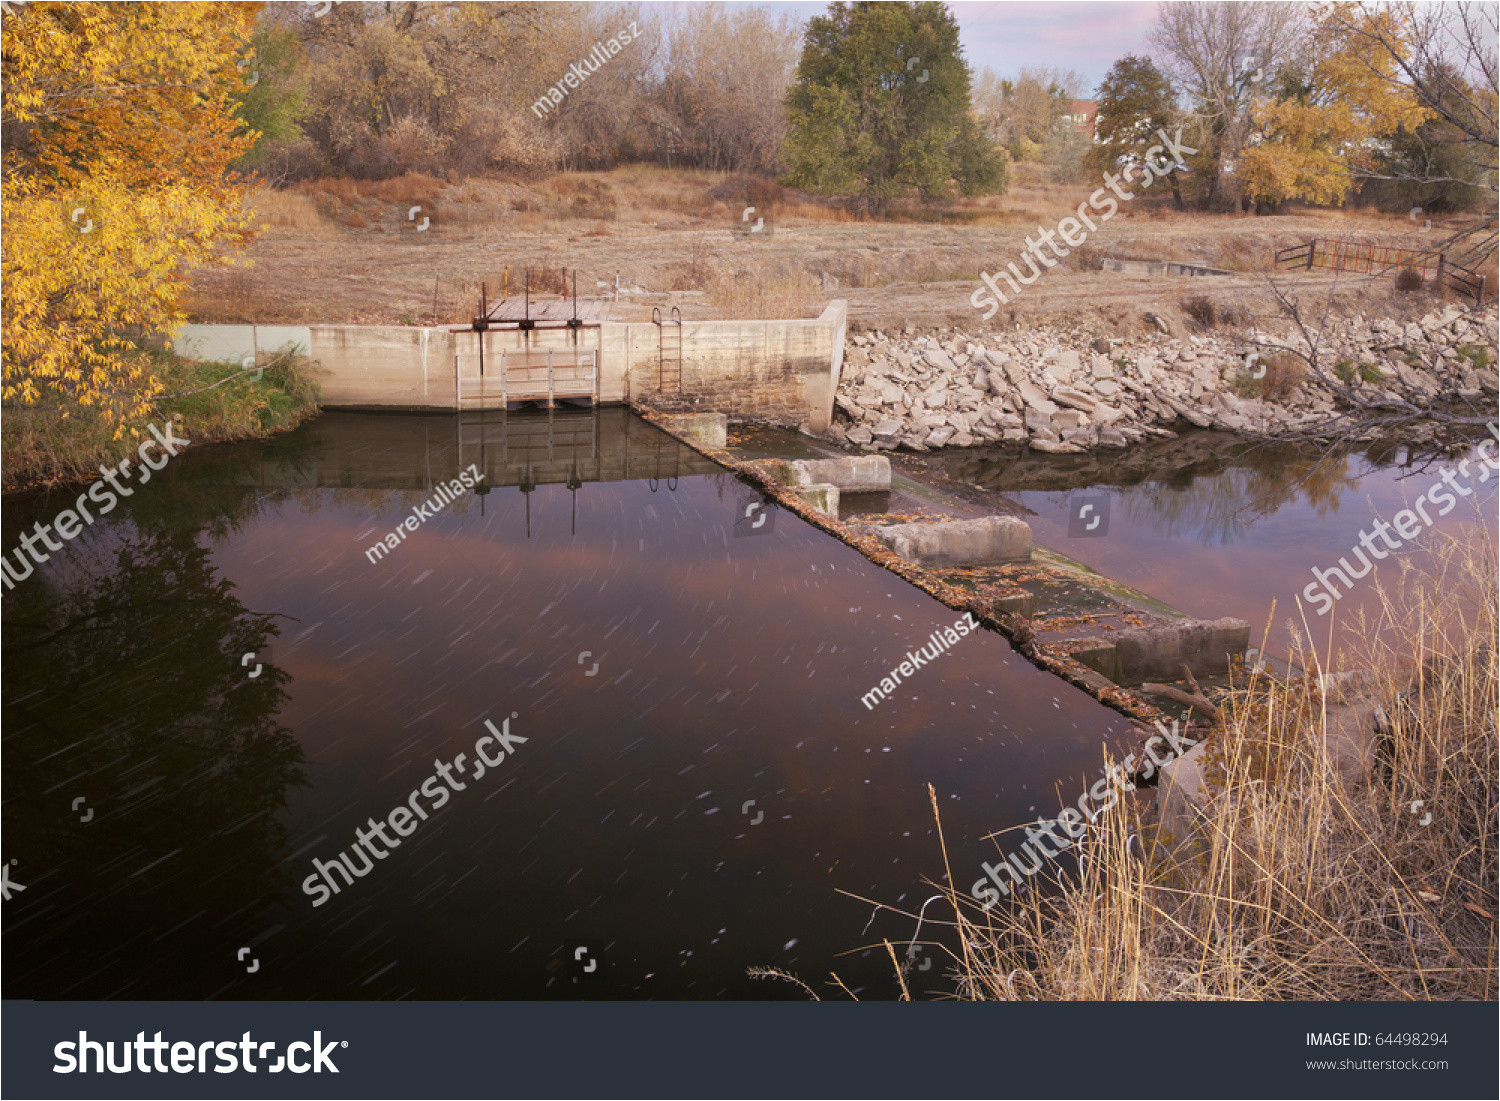 diversion dam with water flowing into irrigation ditch inlet cache la poudre river at fort